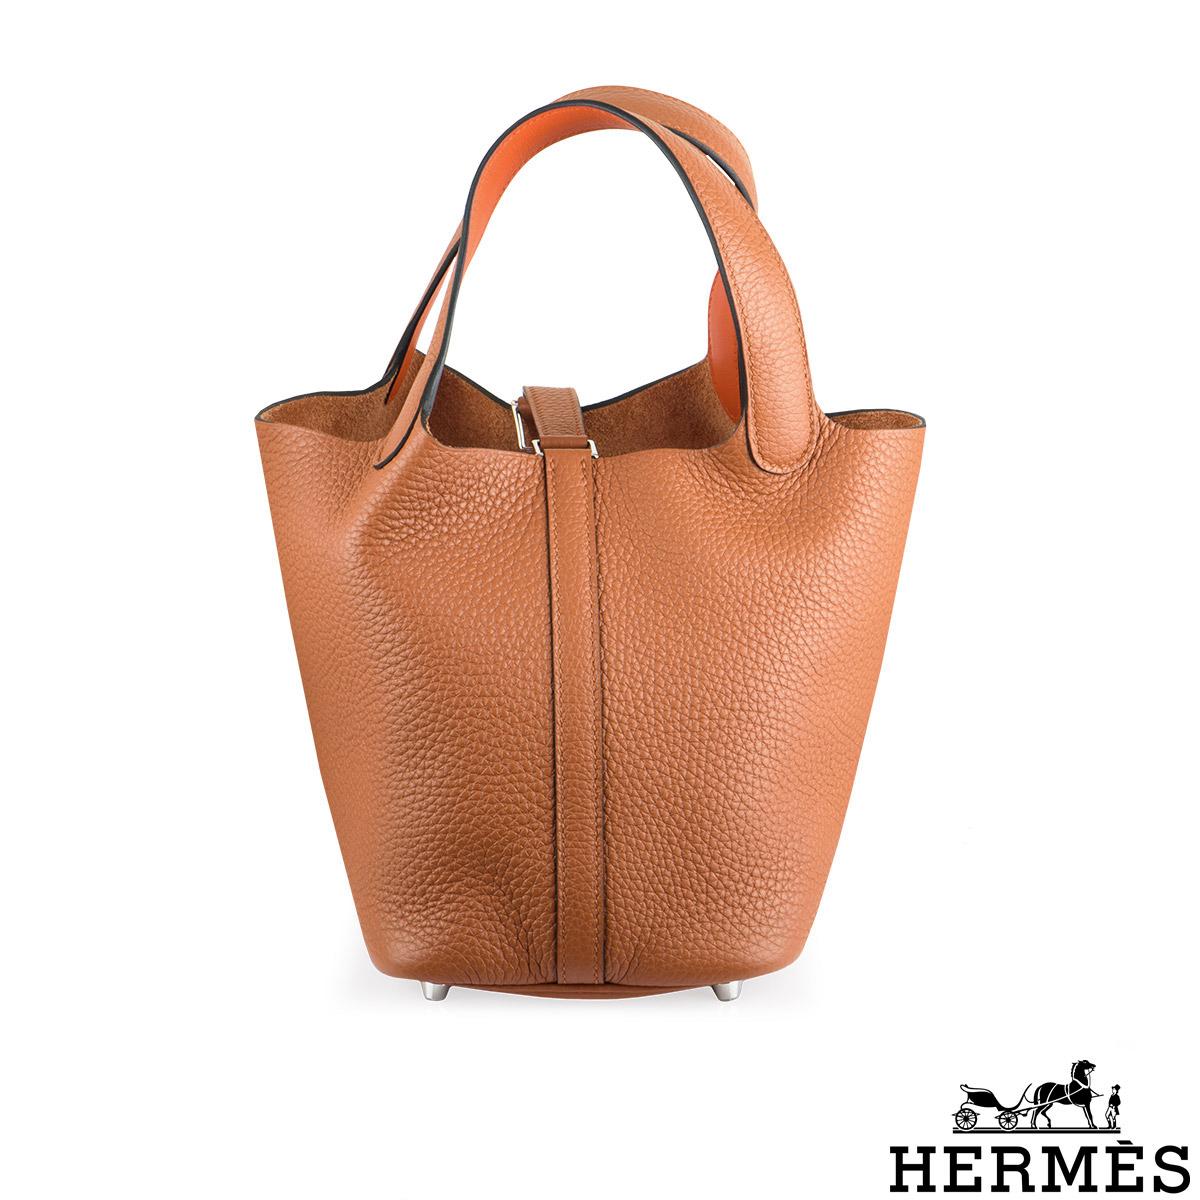 A Chic Hermès Picotin Lock 18 bag. A design inspired by horse troughs, the Picotin is one of the classic and timeless Hermès bags. The exterior of this Picotin features Cuivre Clemence leather. The interior features a natural raw hide lining and